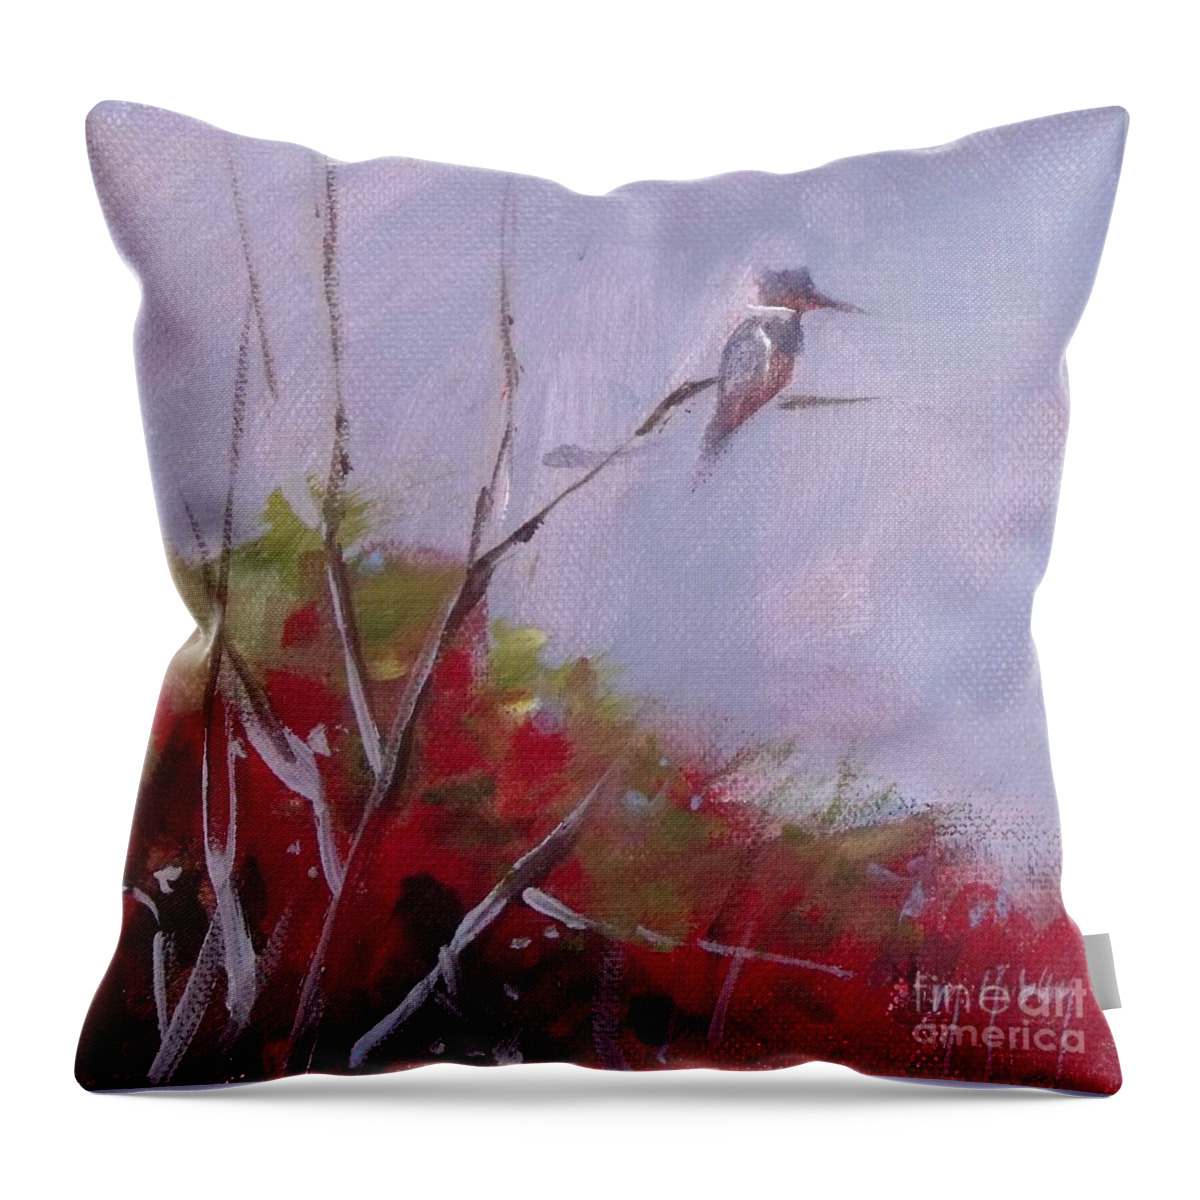 Kingfisher Throw Pillow featuring the painting Kingfisher by Mary Hubley